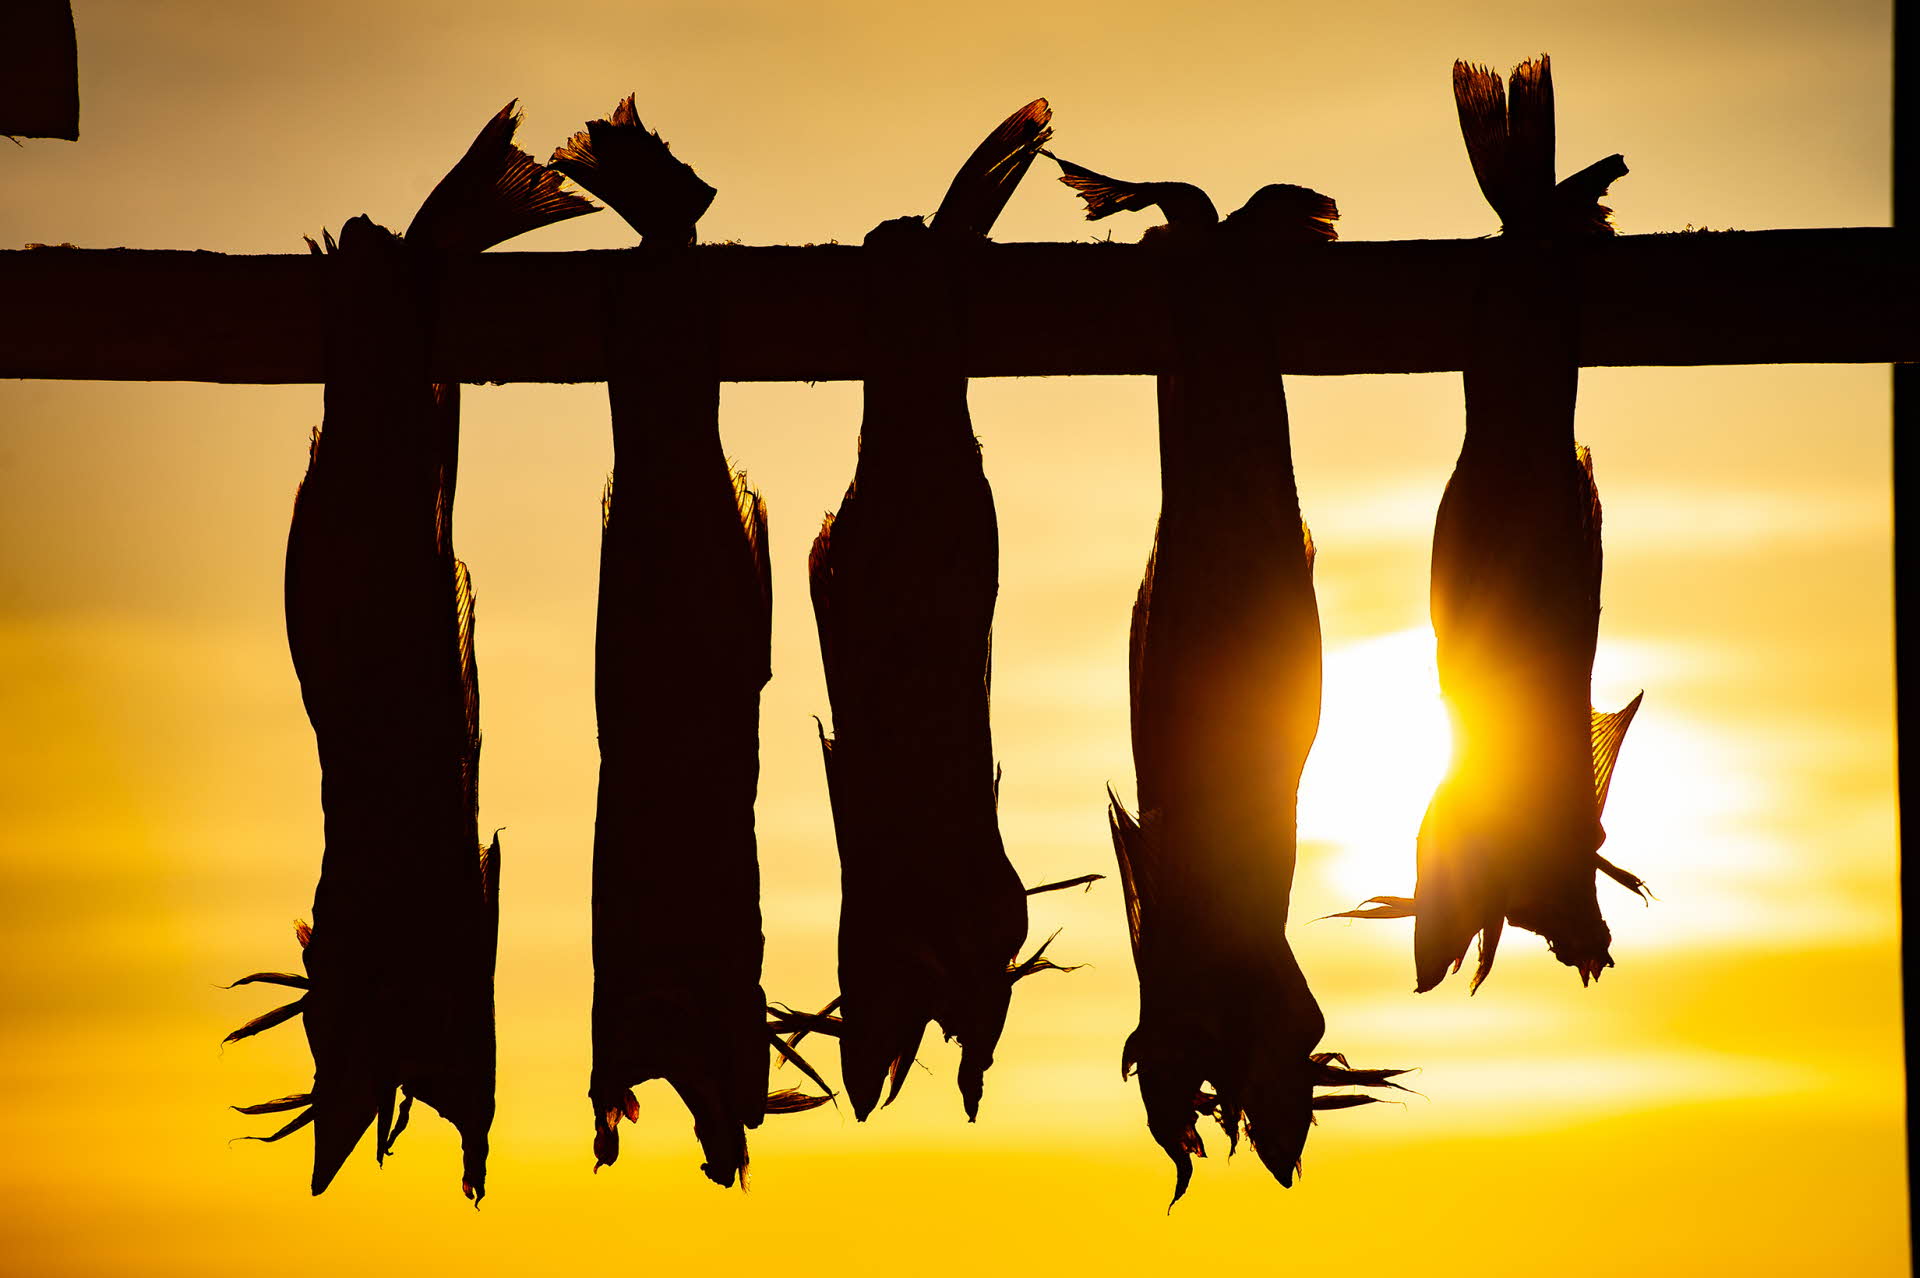 Cod hanging to dry in the Midnight Sun on the Lofoten Islands